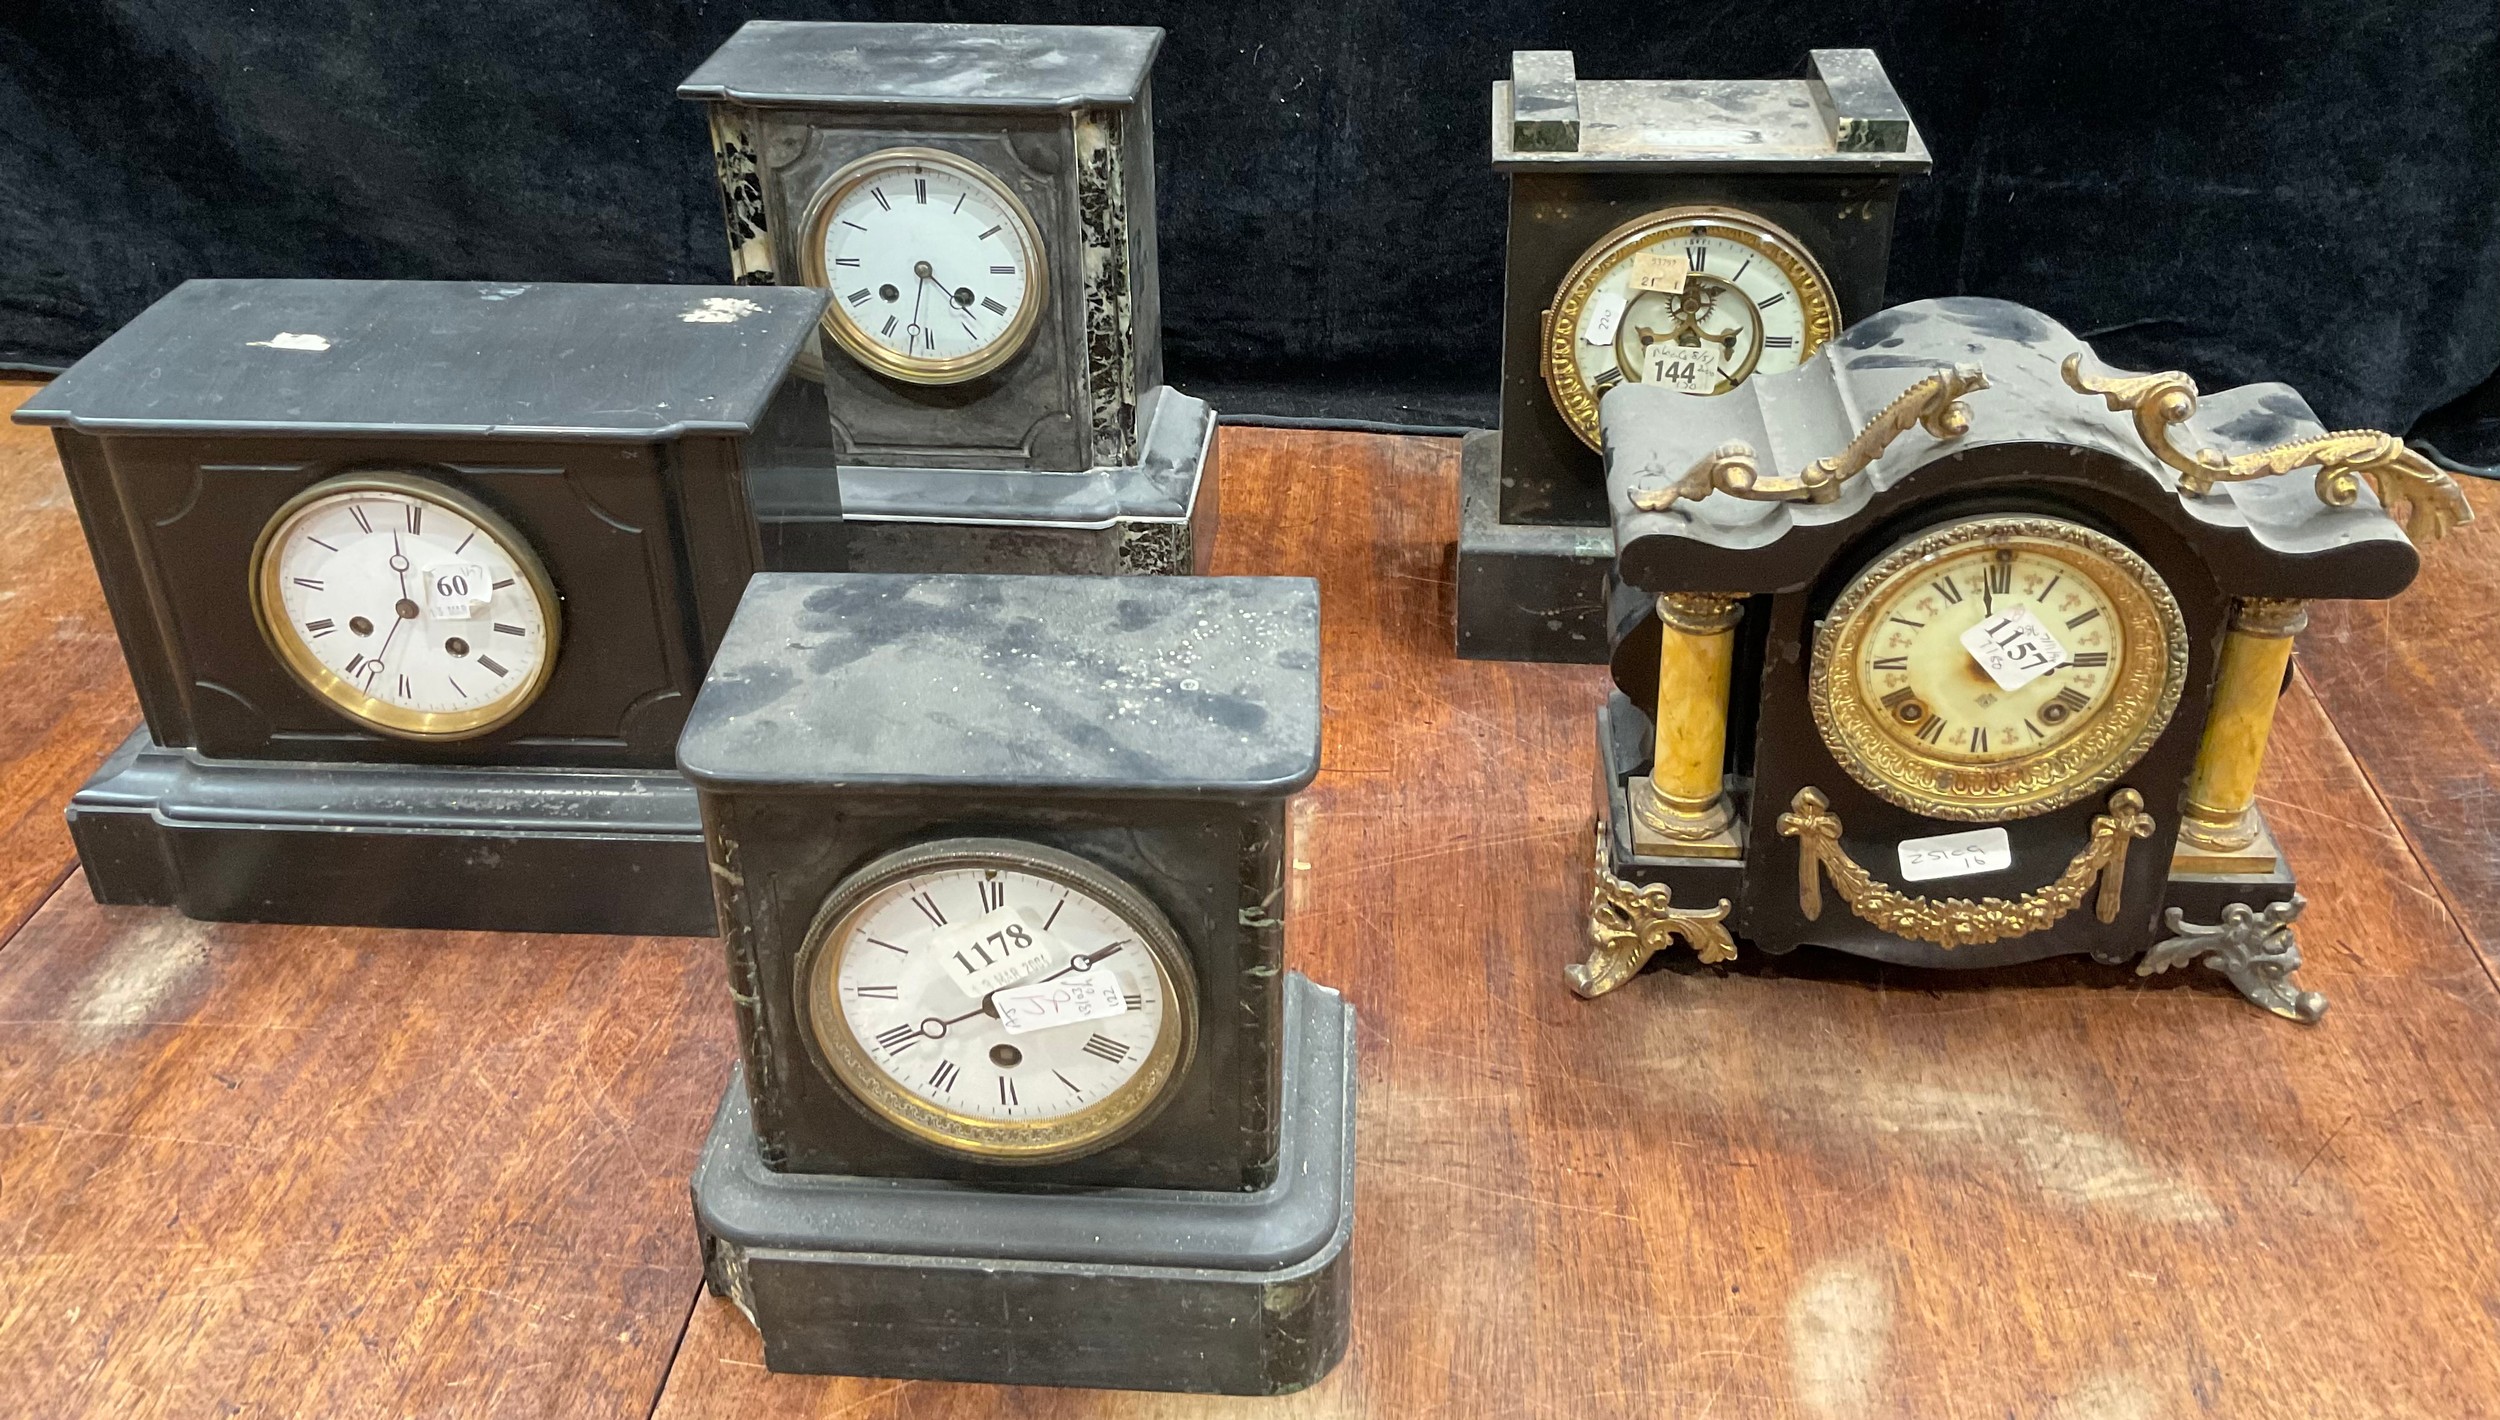 Clocks - late 19th century French marble, various forms (5)